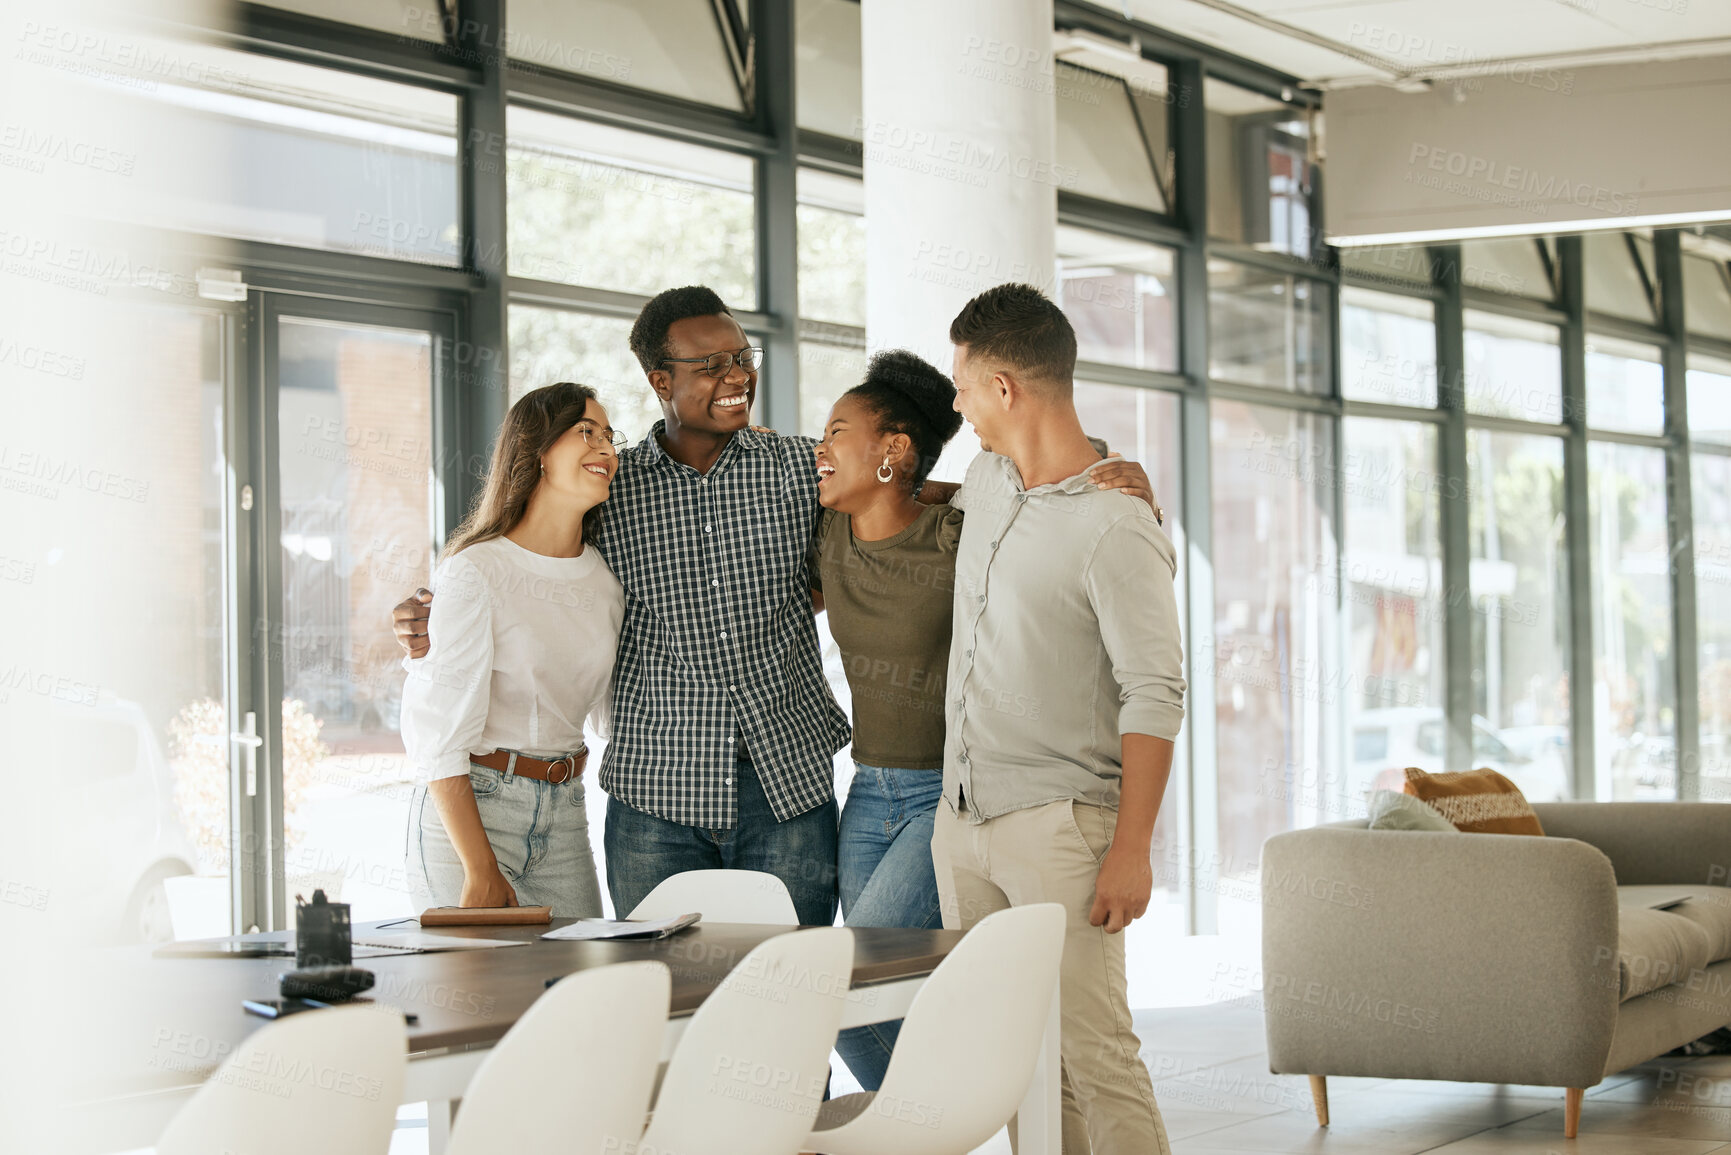 Buy stock photo Multiethnic smiling optimistic confident professional coworkers embracing in modern office and demonstrating unity. Business team standing together in startup